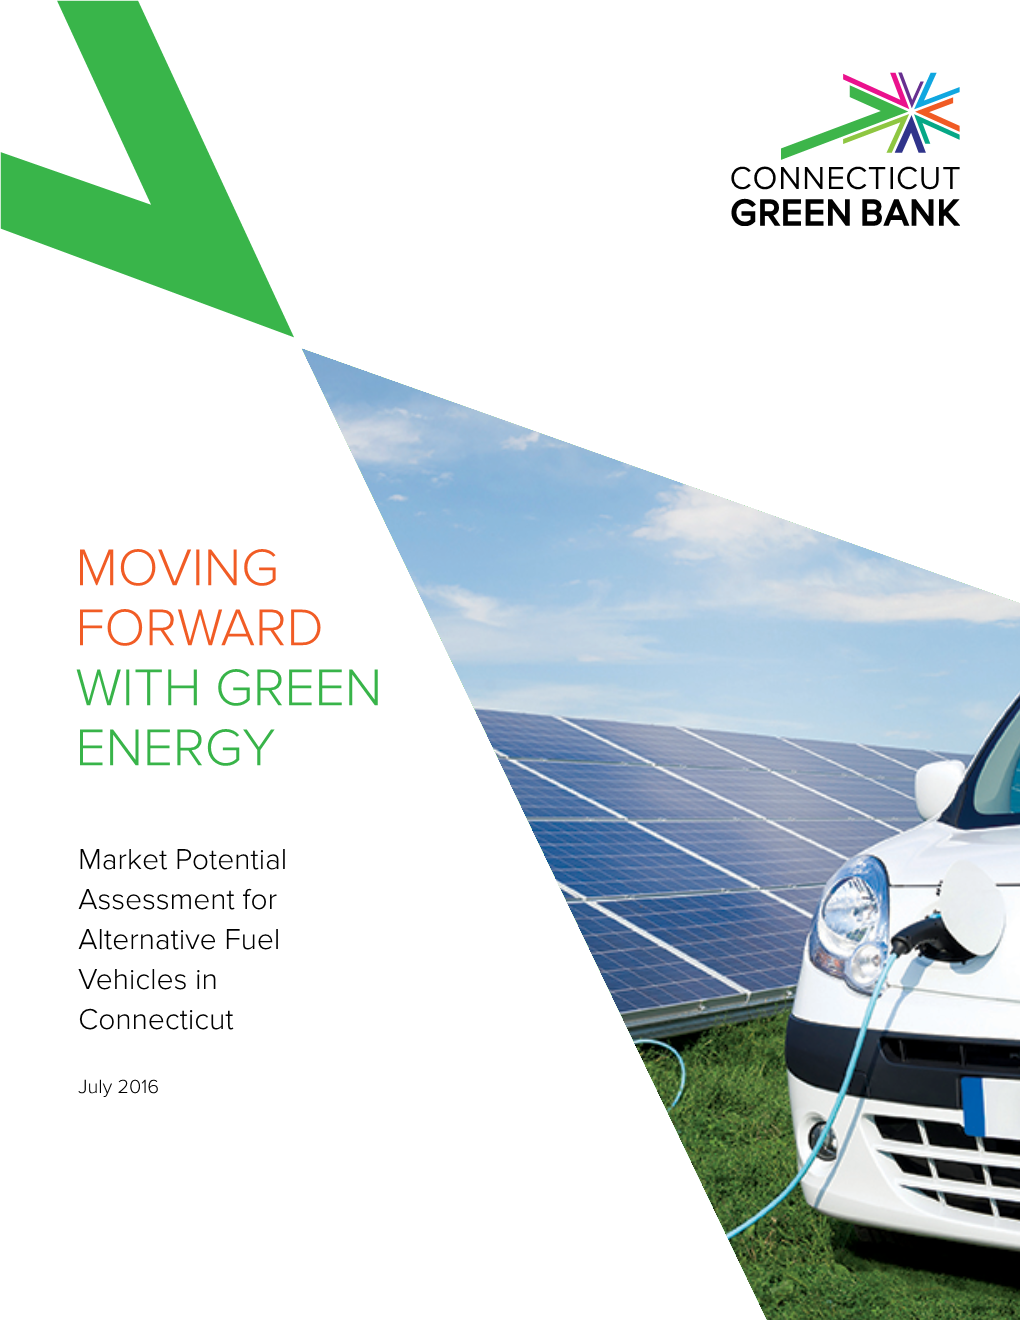 Market Potential Assessment for Alternative Fuel Vehicles in Connecticut